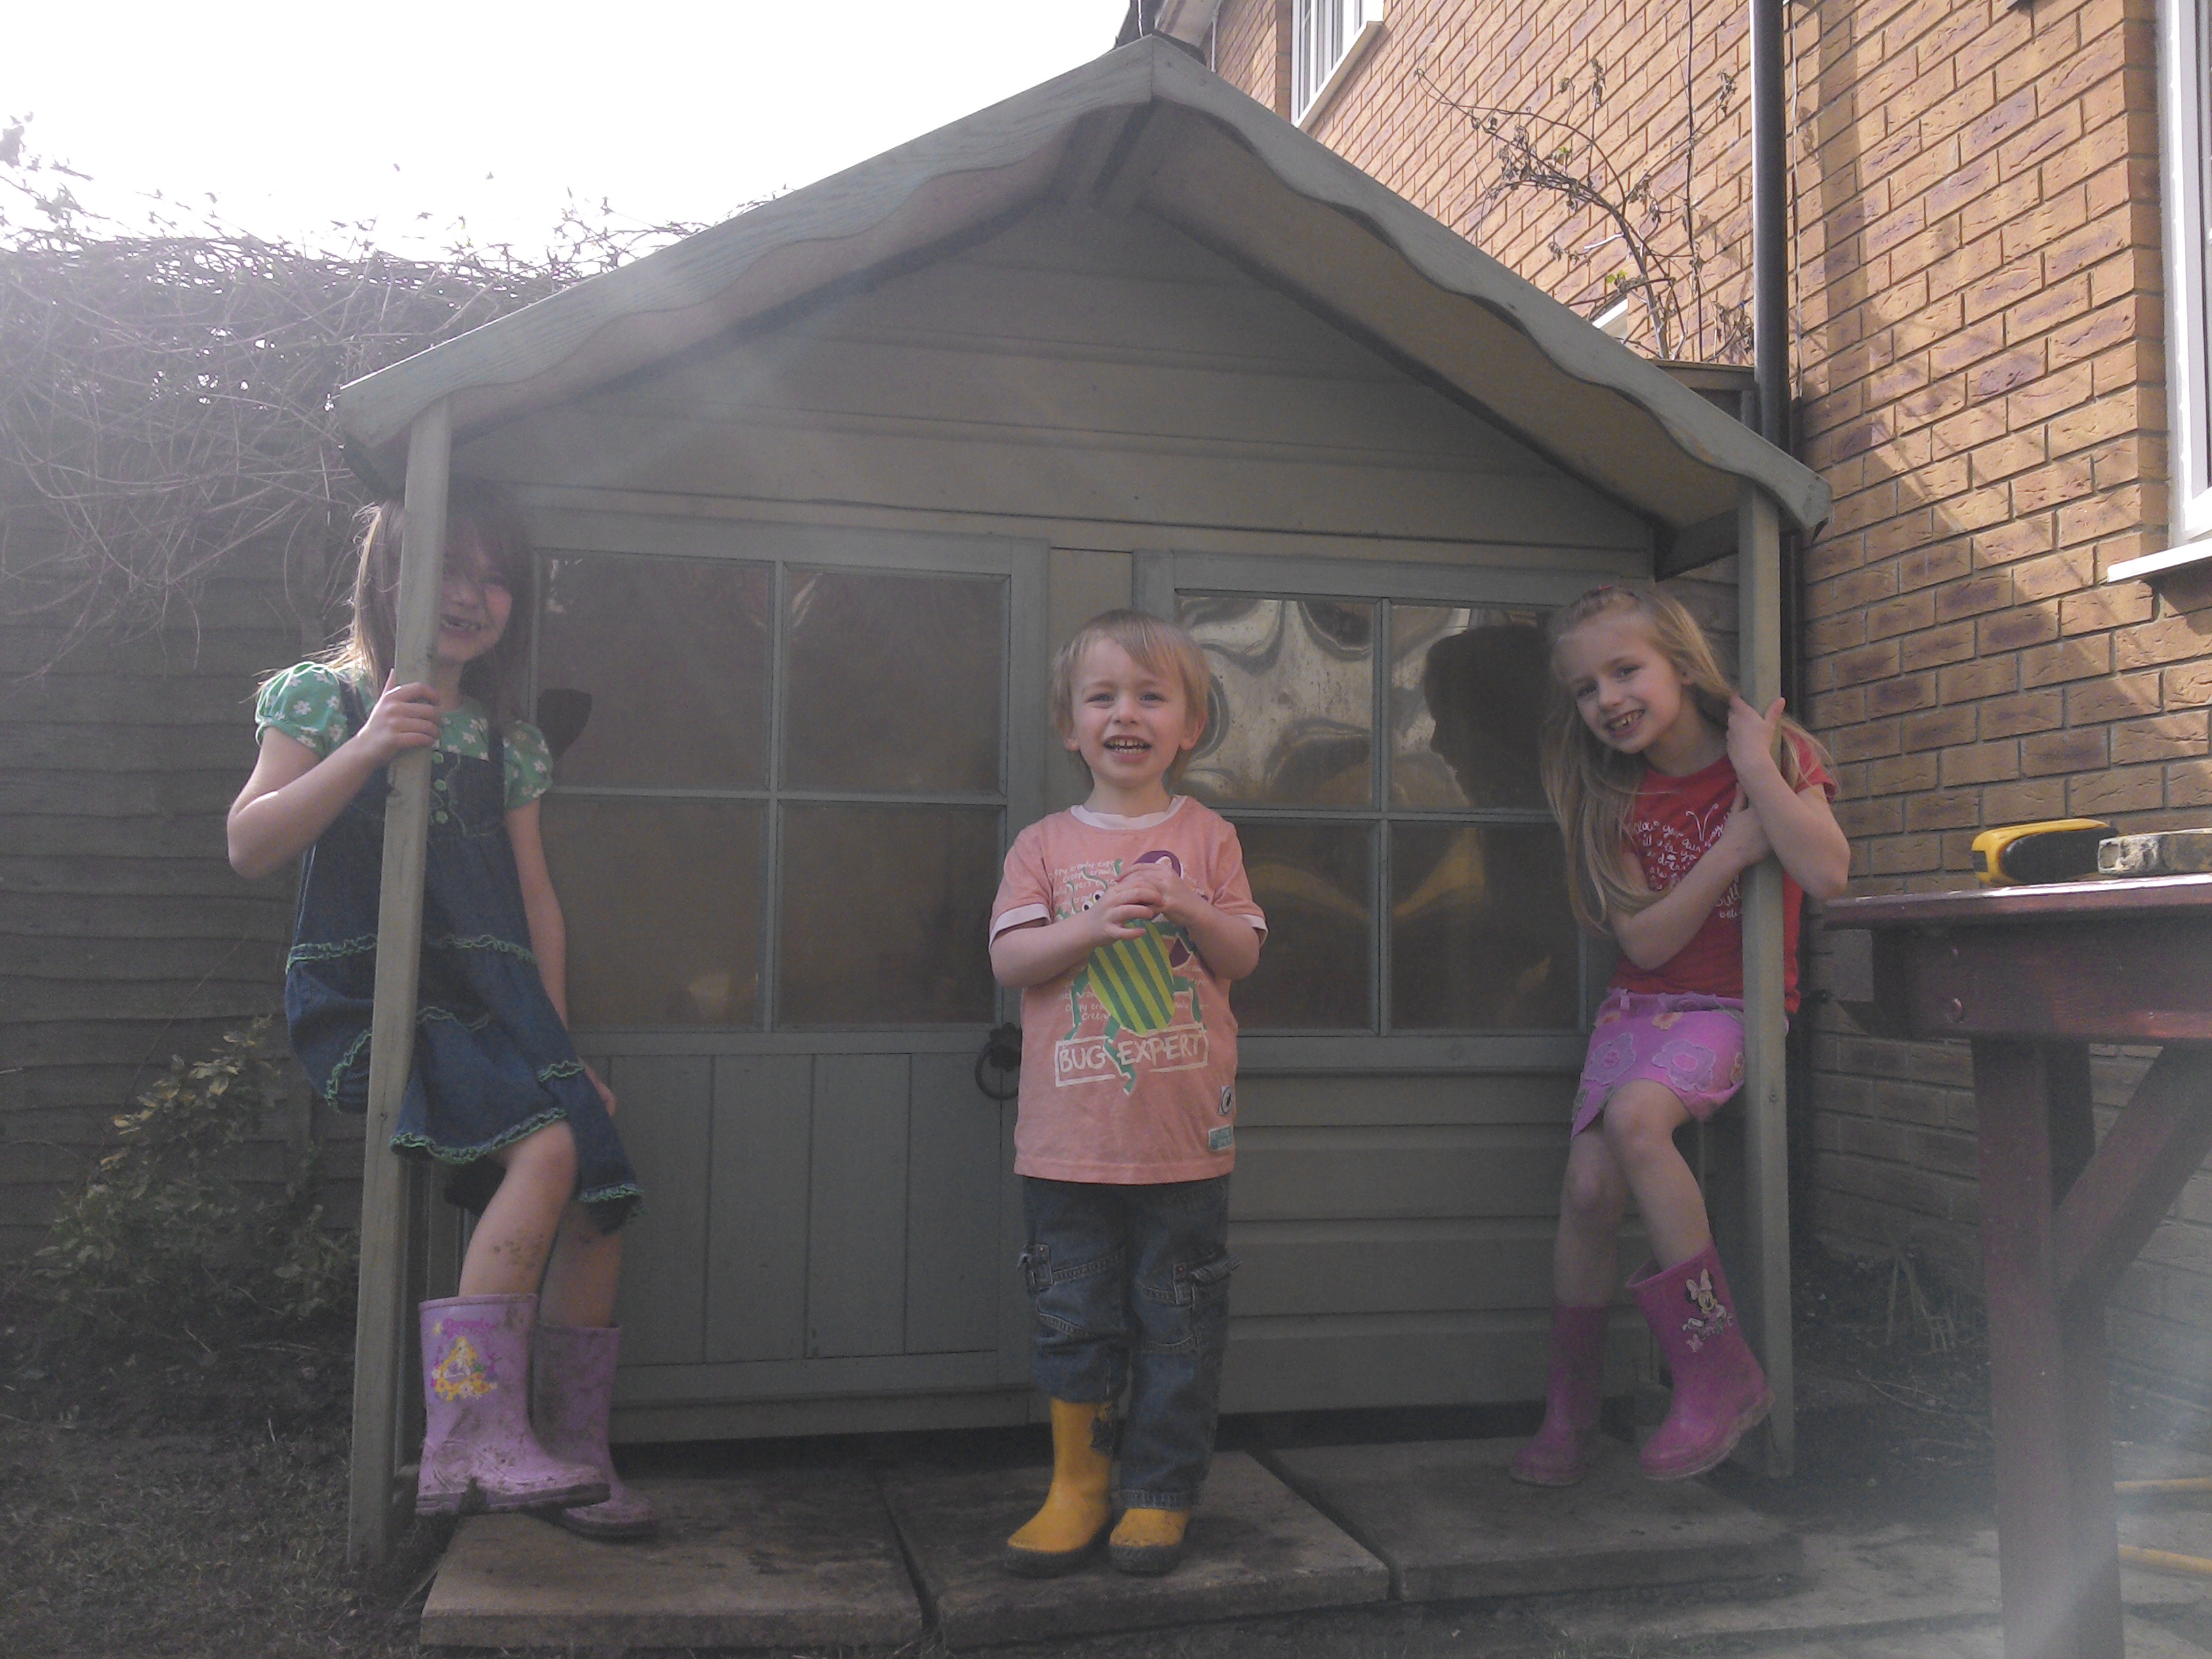 Spread The Word Lets Get The Kids Involved In The Geospatial Industry - many thanks to phil shuttleworth for the image of his kids setting out their wendy house